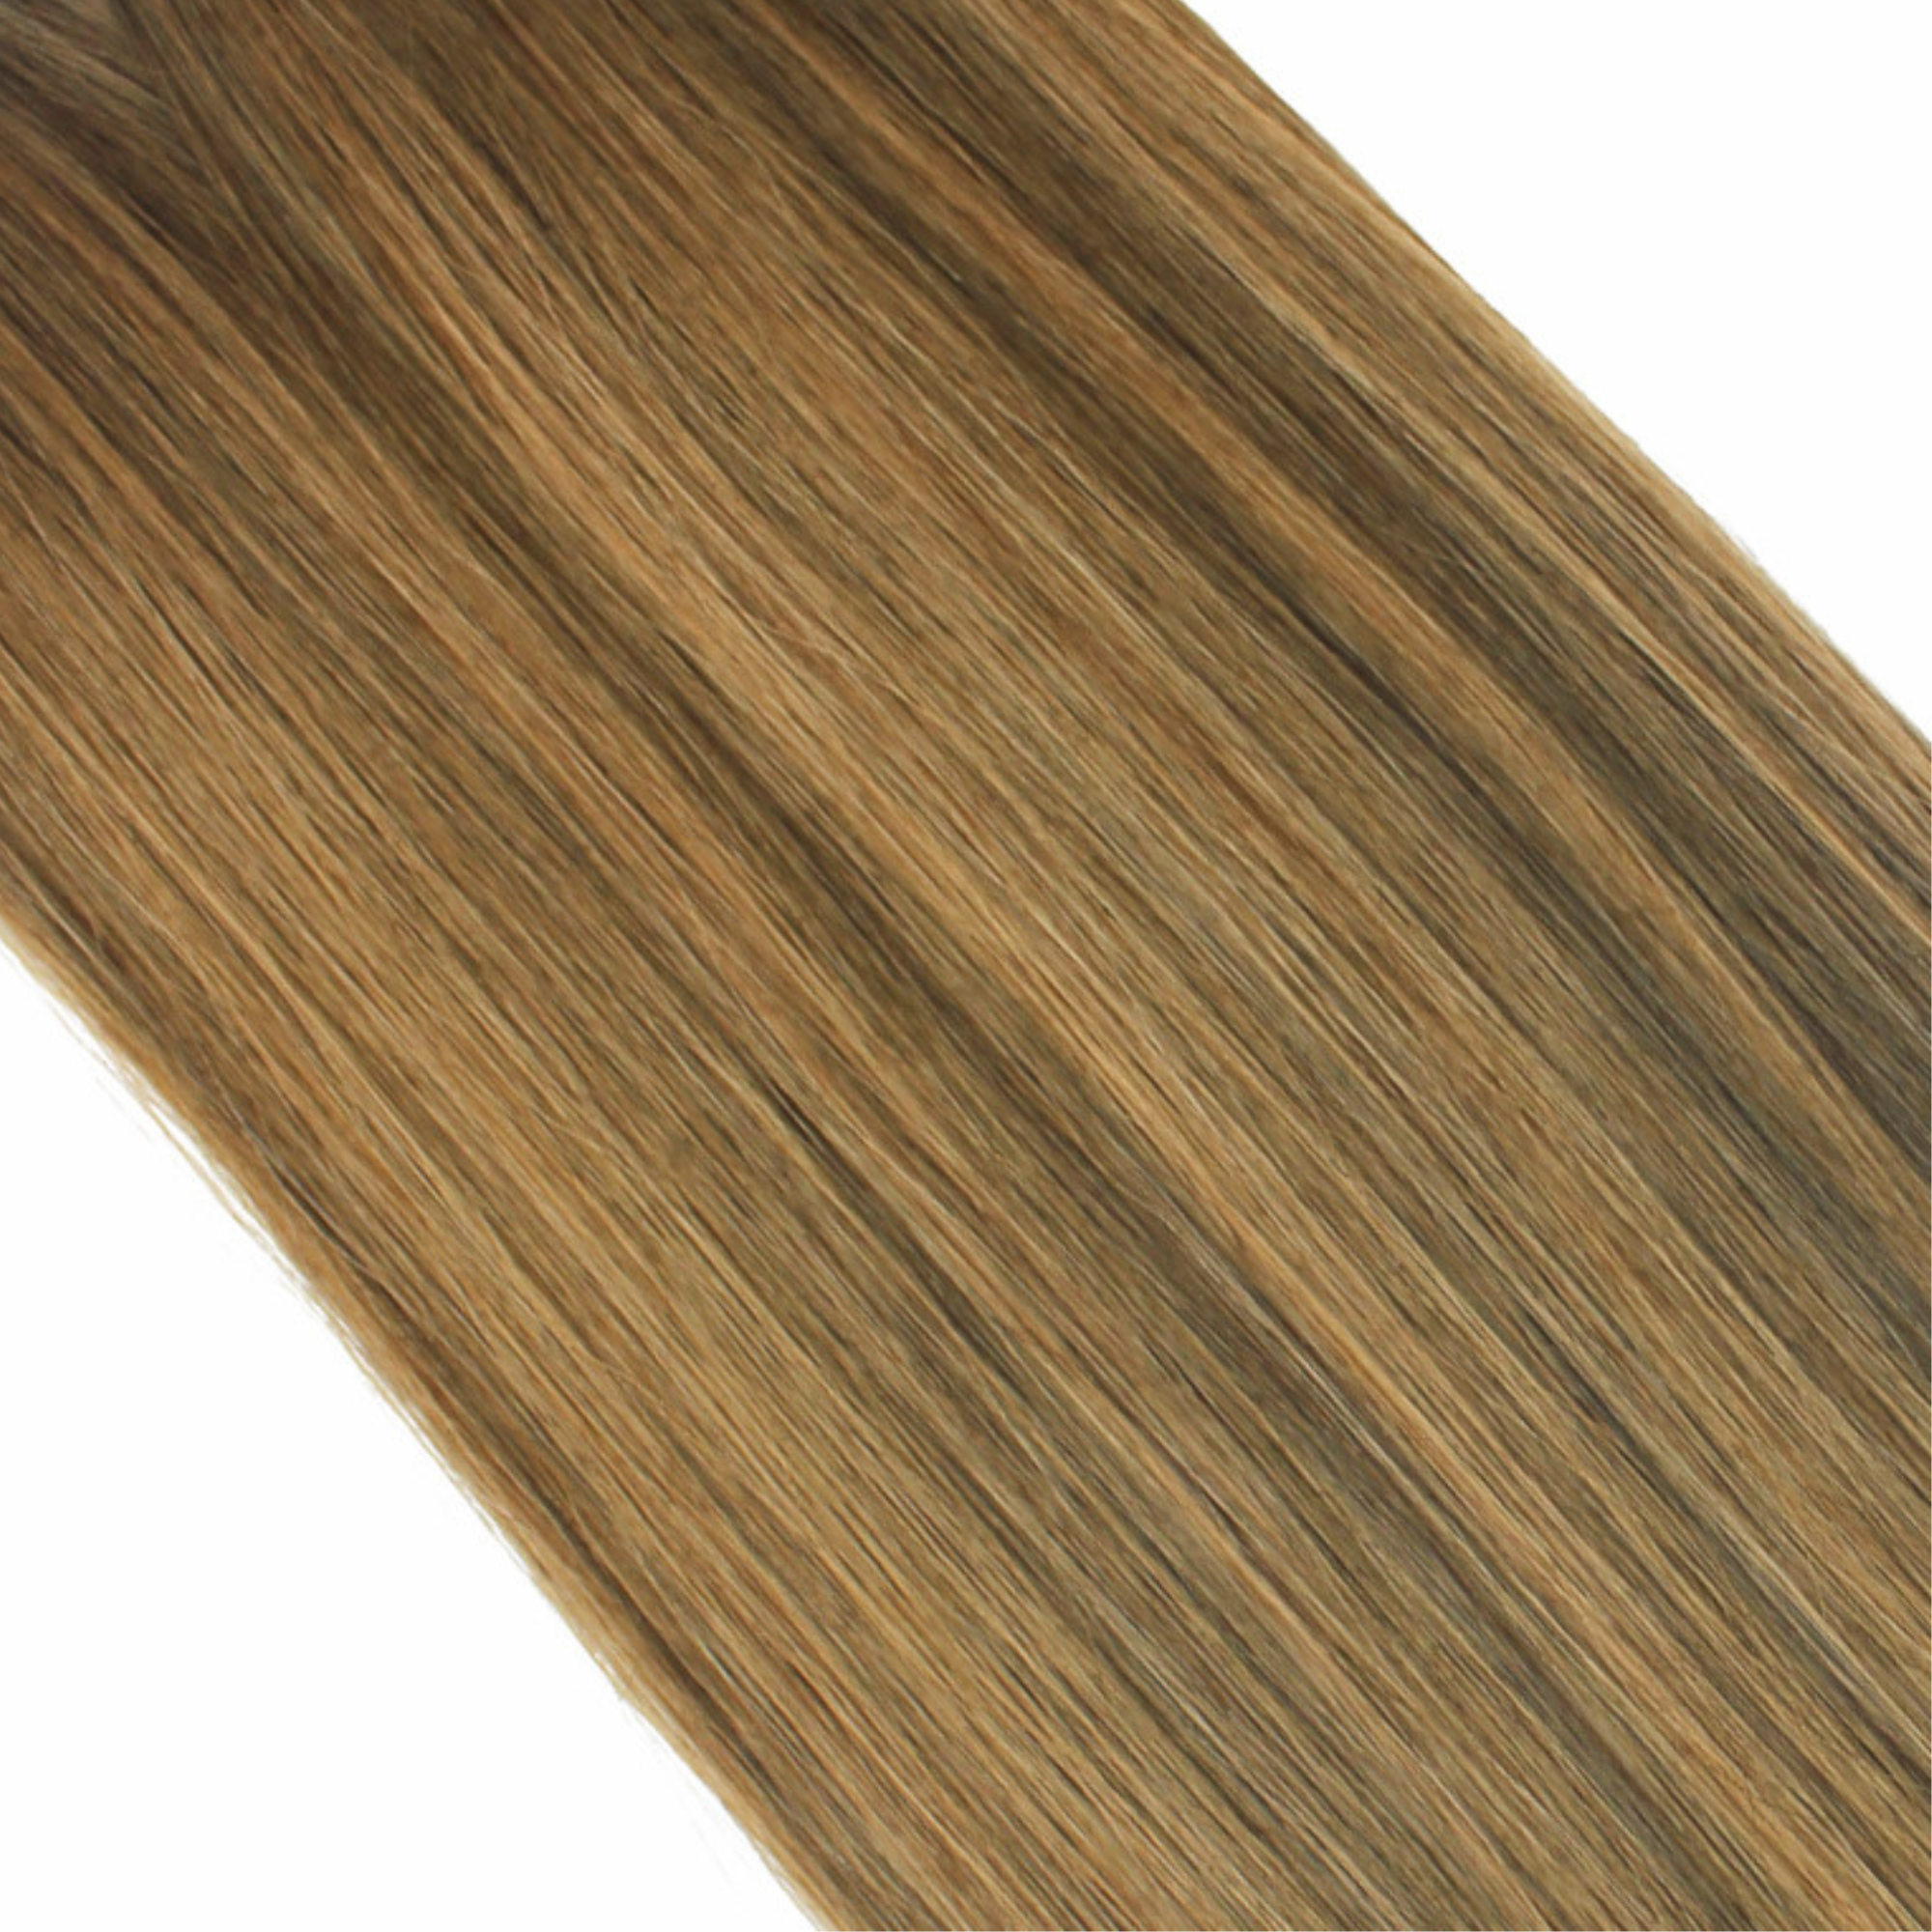 "hair rehab london 18" tape hair extensions shade swatch titled honey brown"